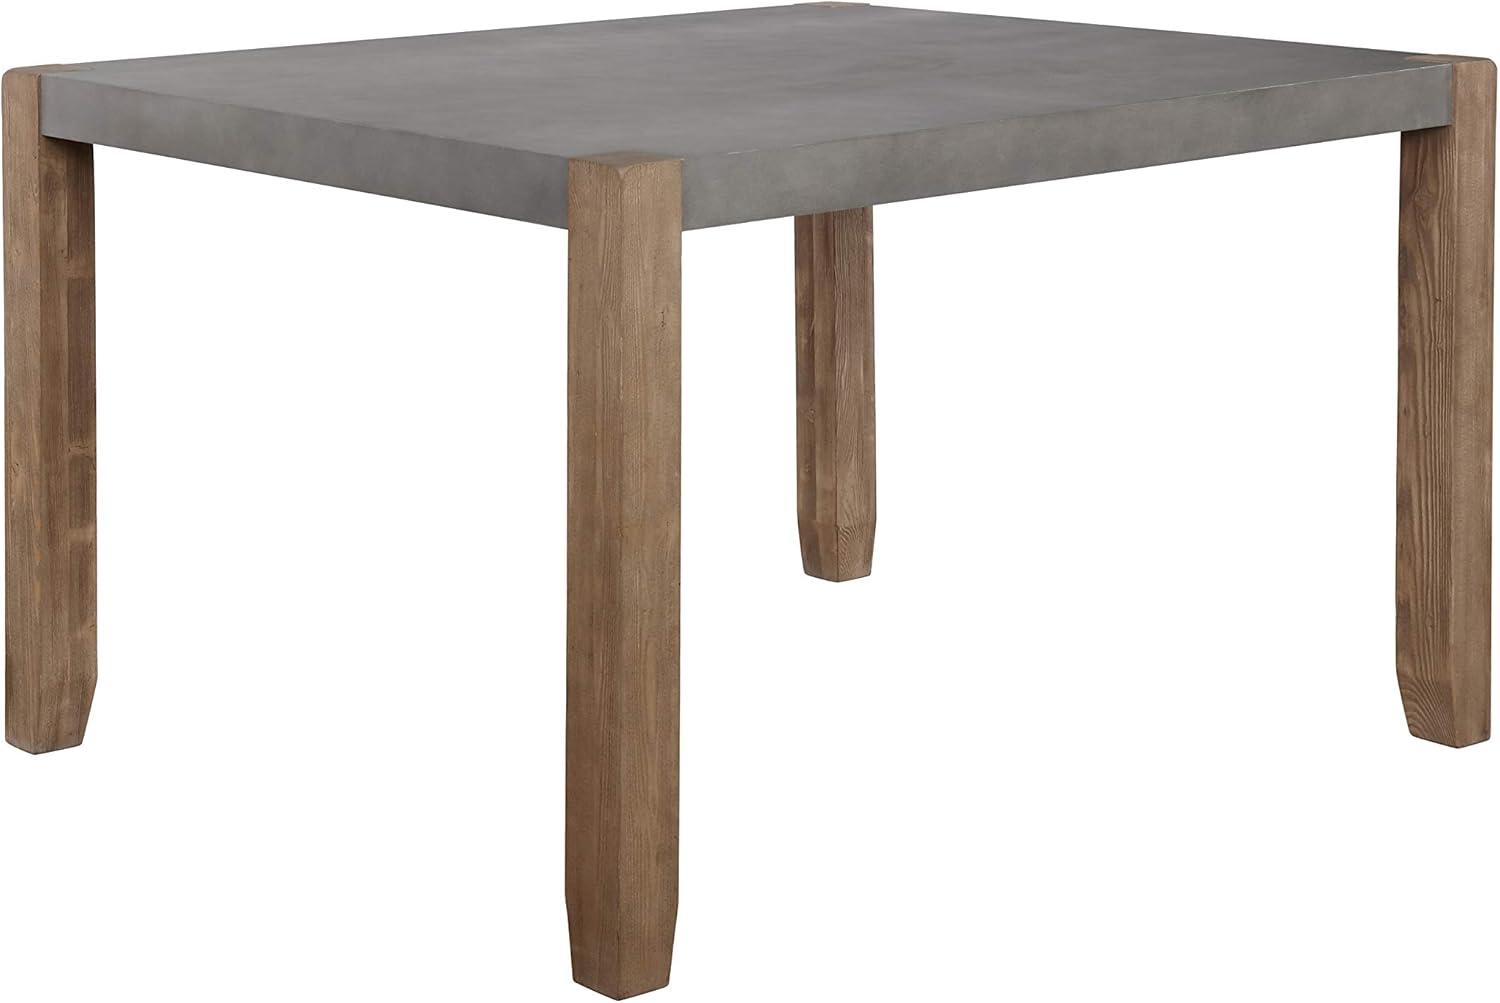 Loft-Style 30" Reclaimed Wood and Faux Concrete Dining Table